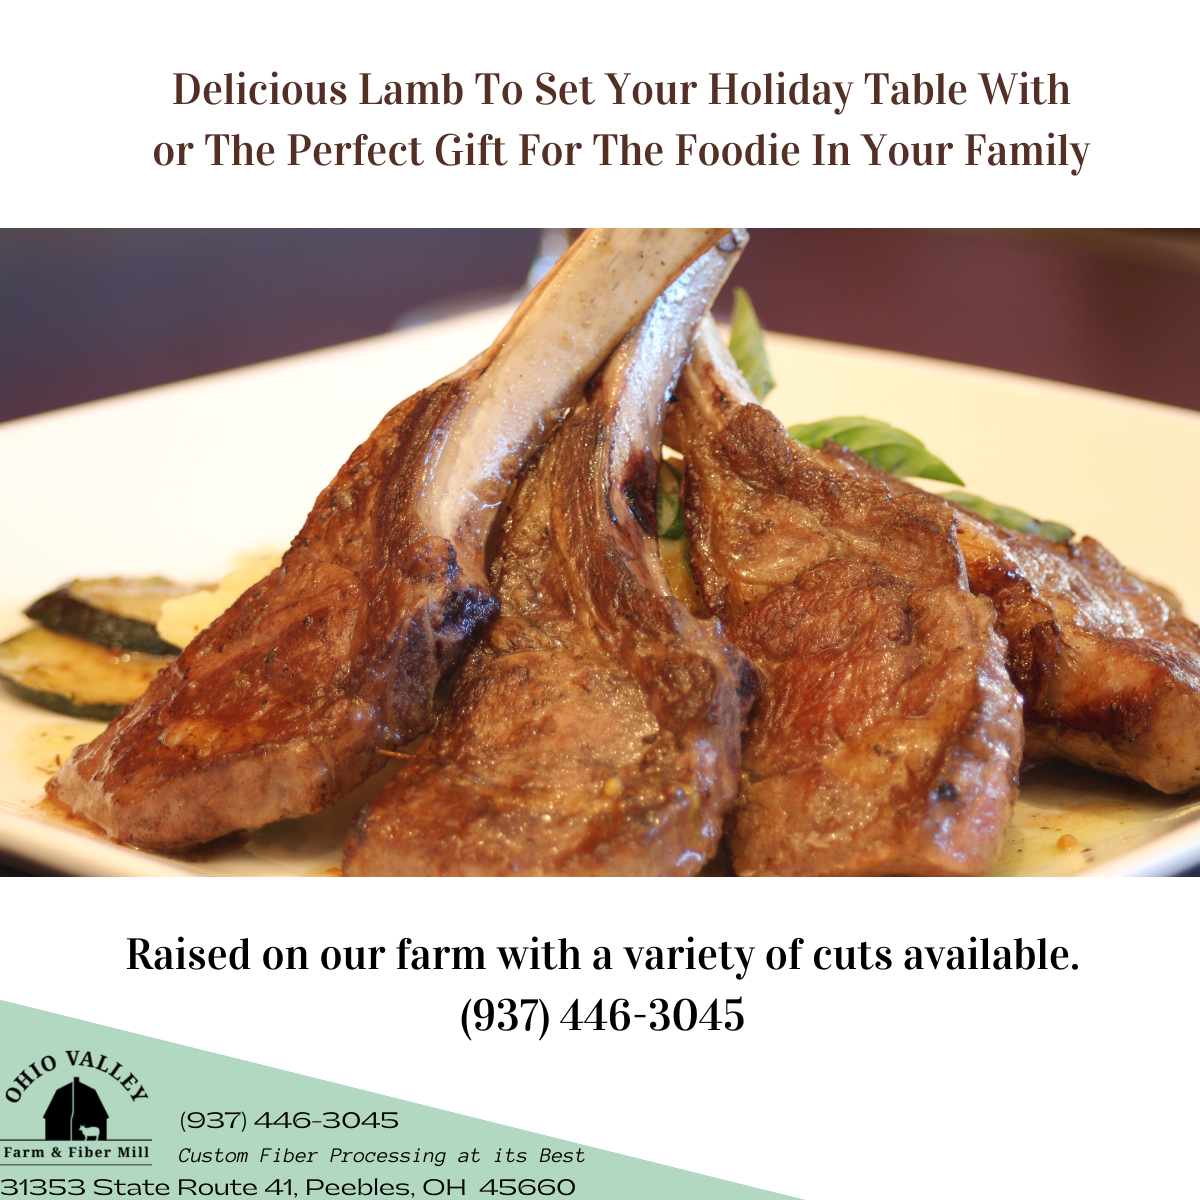 Delicious lamb to set your holiday table with or the perfect gift for the foodie in your family. Raised on Ohio Valley Farm & Fiber Mill with various cuts of meat offered.